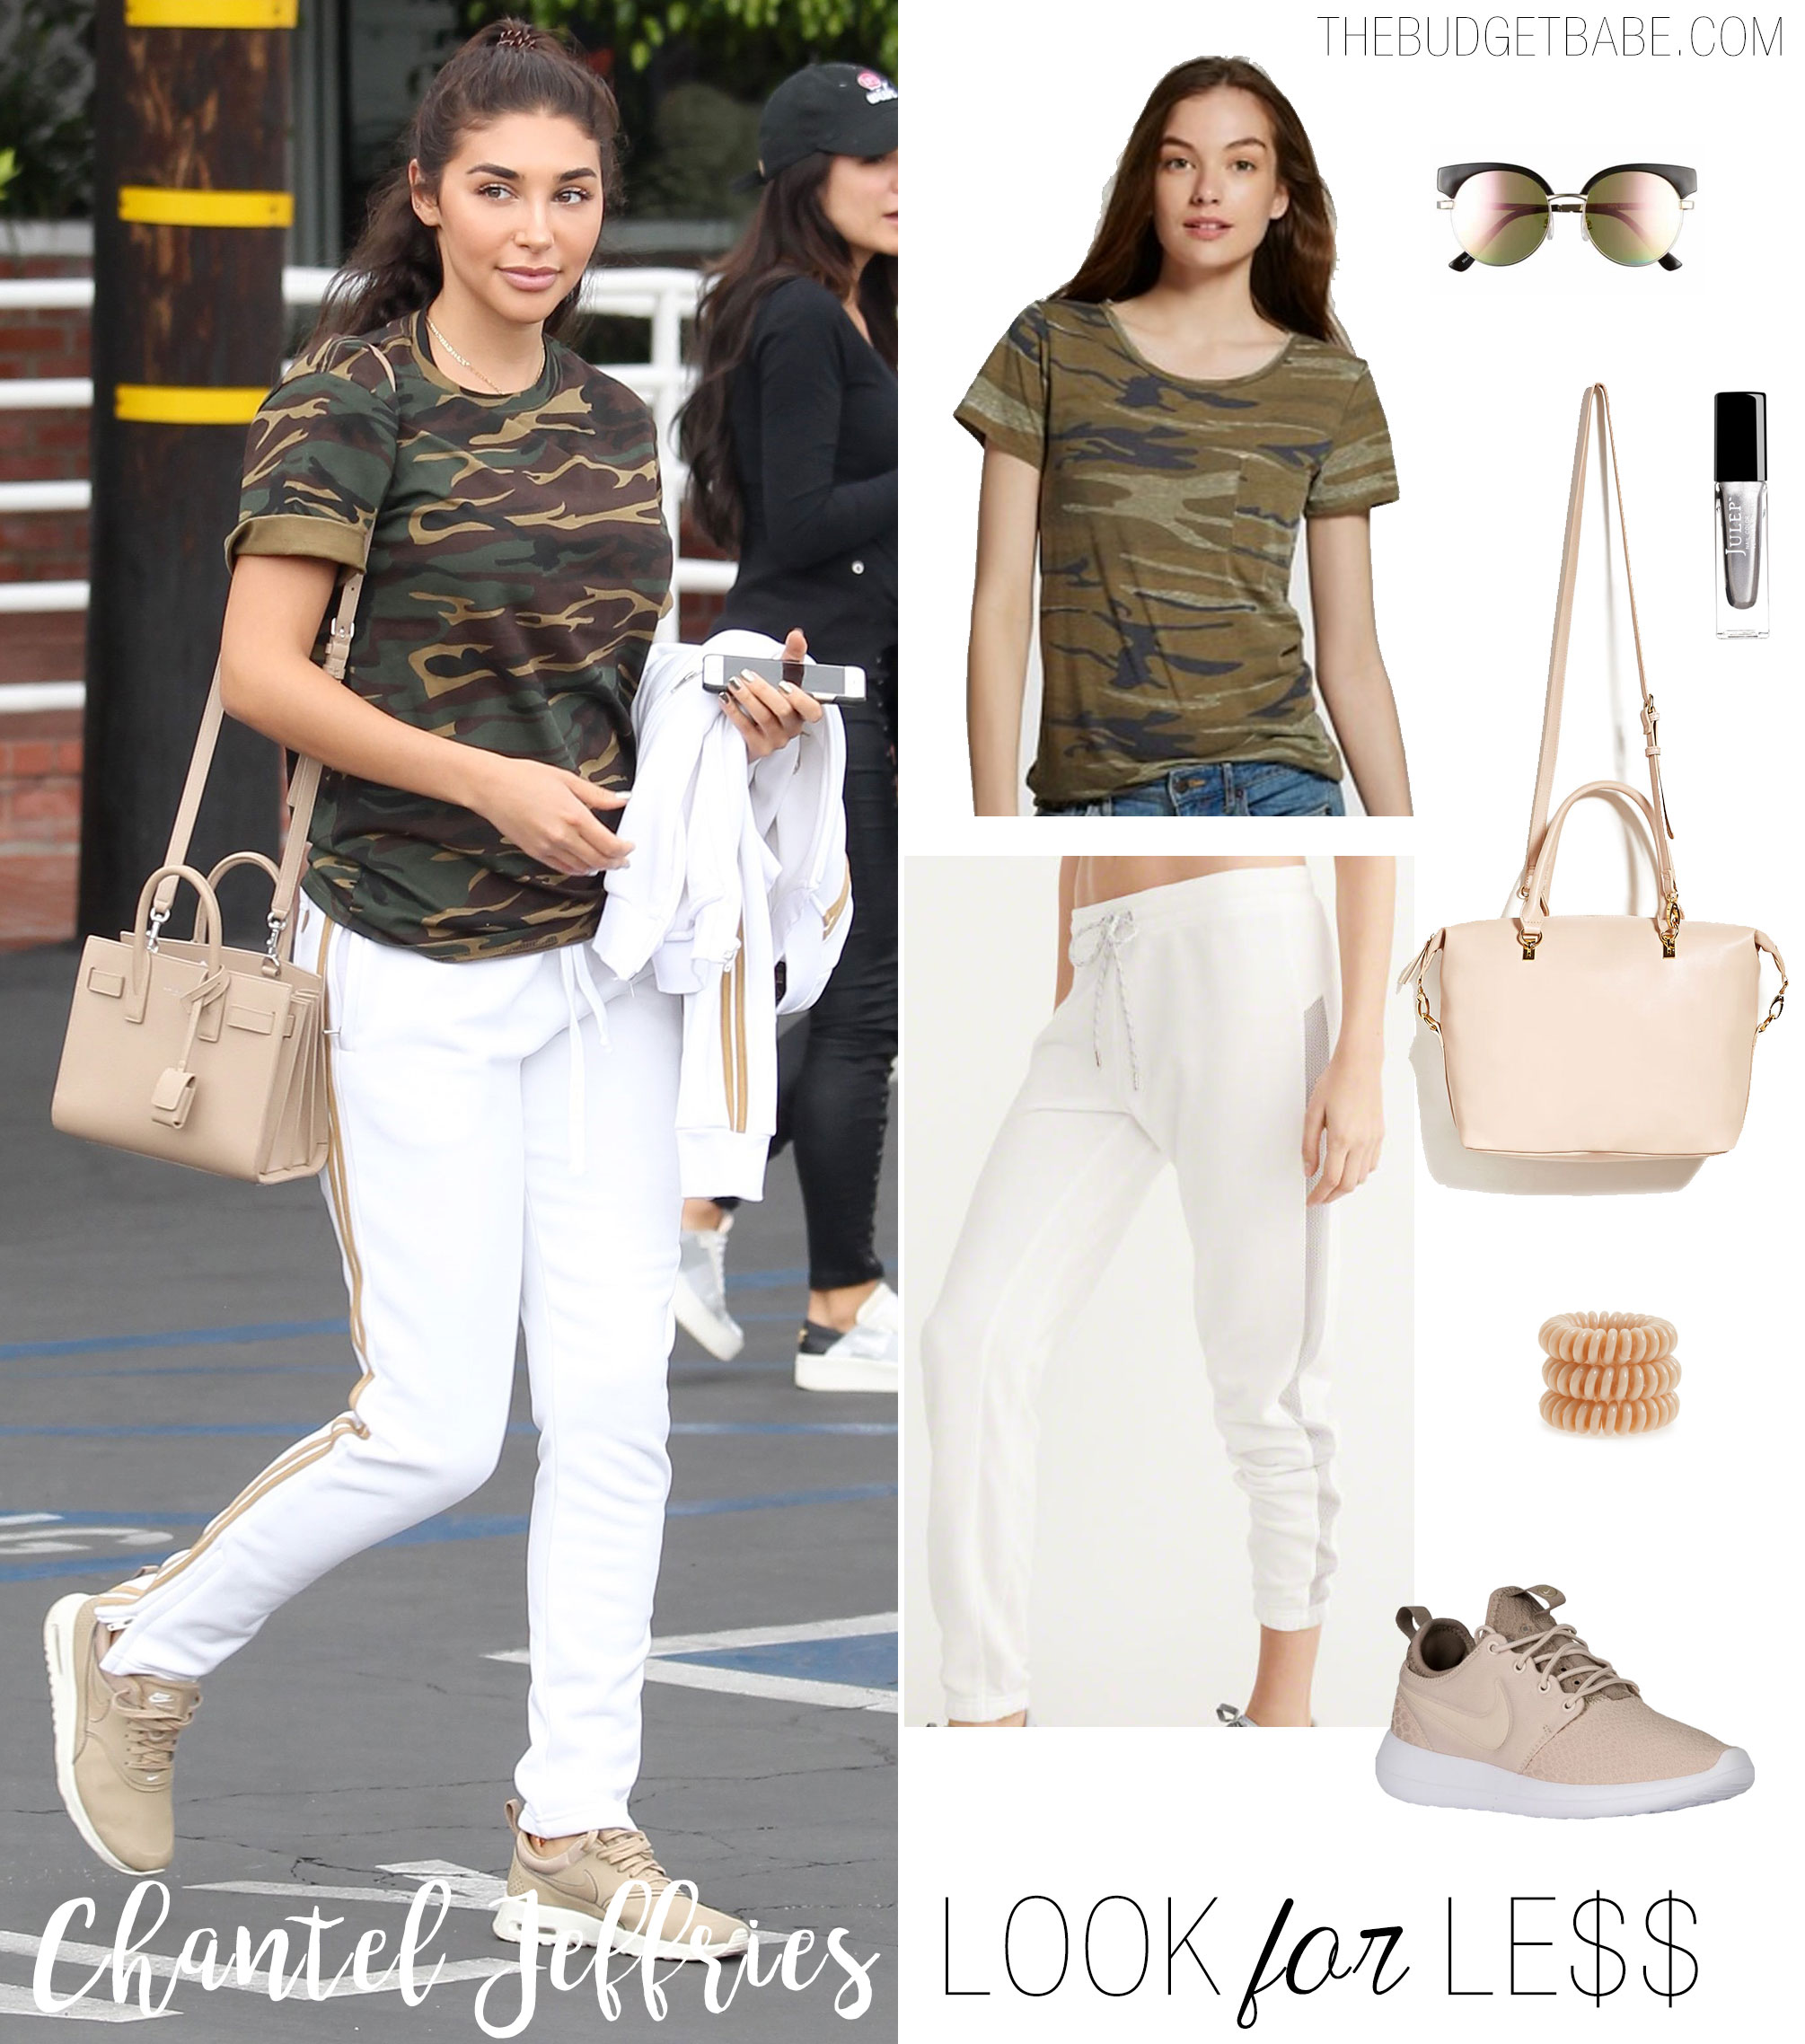 Here's a cute and casual summer outfit idea featuring a camo tee and white joggers.